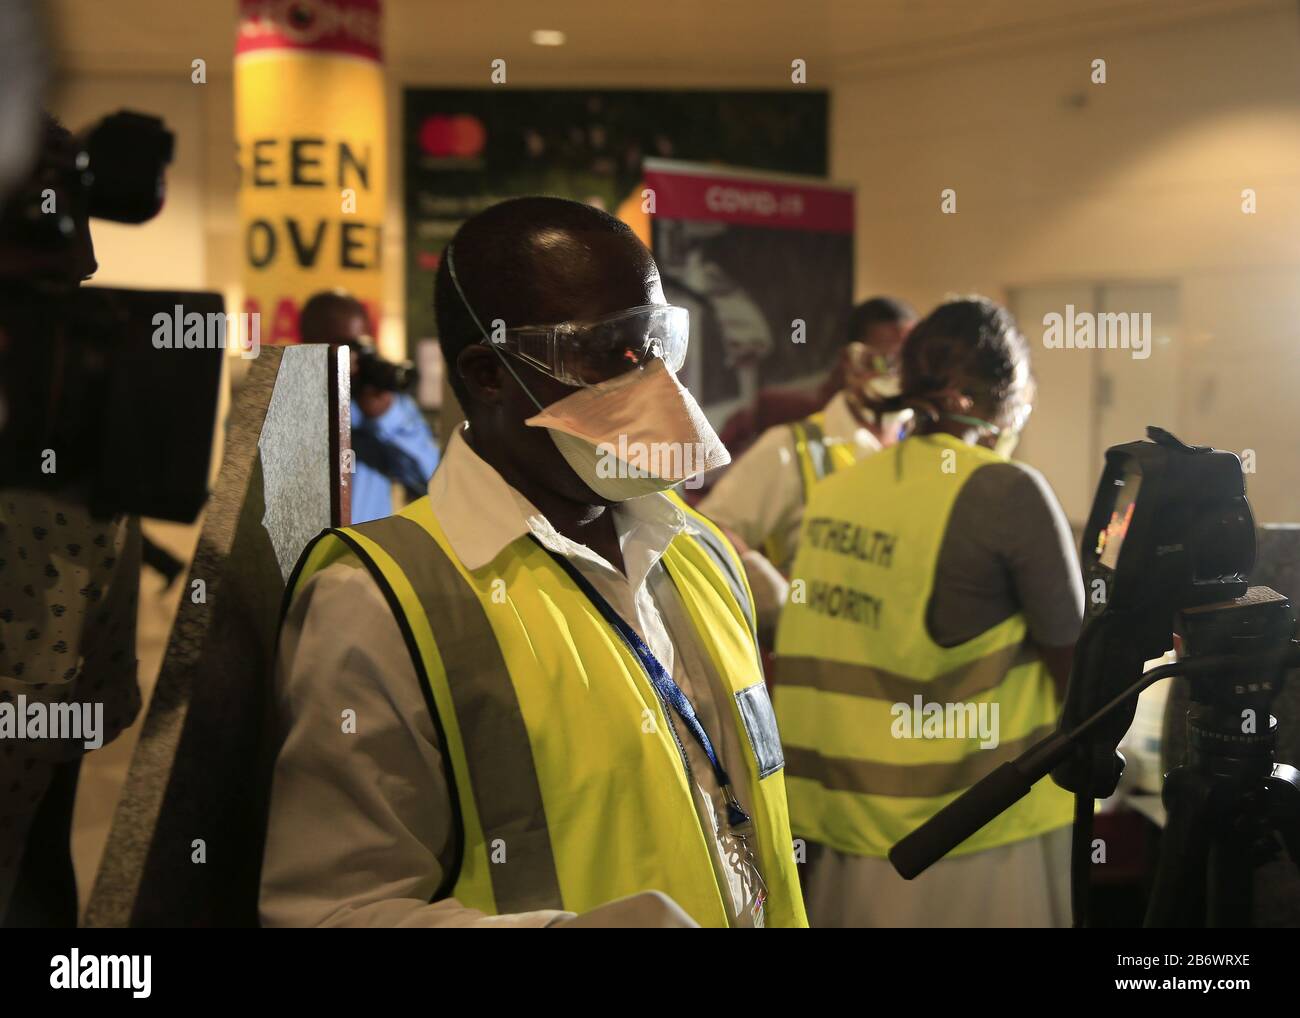 (200312) -- HARARE, March 12, 2020 (Xinhua) -- Staff wearing face masks work at the Robert Gabriel Mugabe International Airport in Harare, Zimbabwe, March 11, 2020. Zimbabwe's main airport is '60 percent prepared' to deal with COVID-19 and more resources are required for training and procurement of essential protective equipment for critical staff, Ruth Labode, chairperson of the parliamentary portfolio committee on health said Wednesday, after touring the Robert Gabriel Mugabe International Airport in Harare to assess its preparedness to deal with the virus. (Photo by Shaun Jusa/Xinhua) Stock Photo